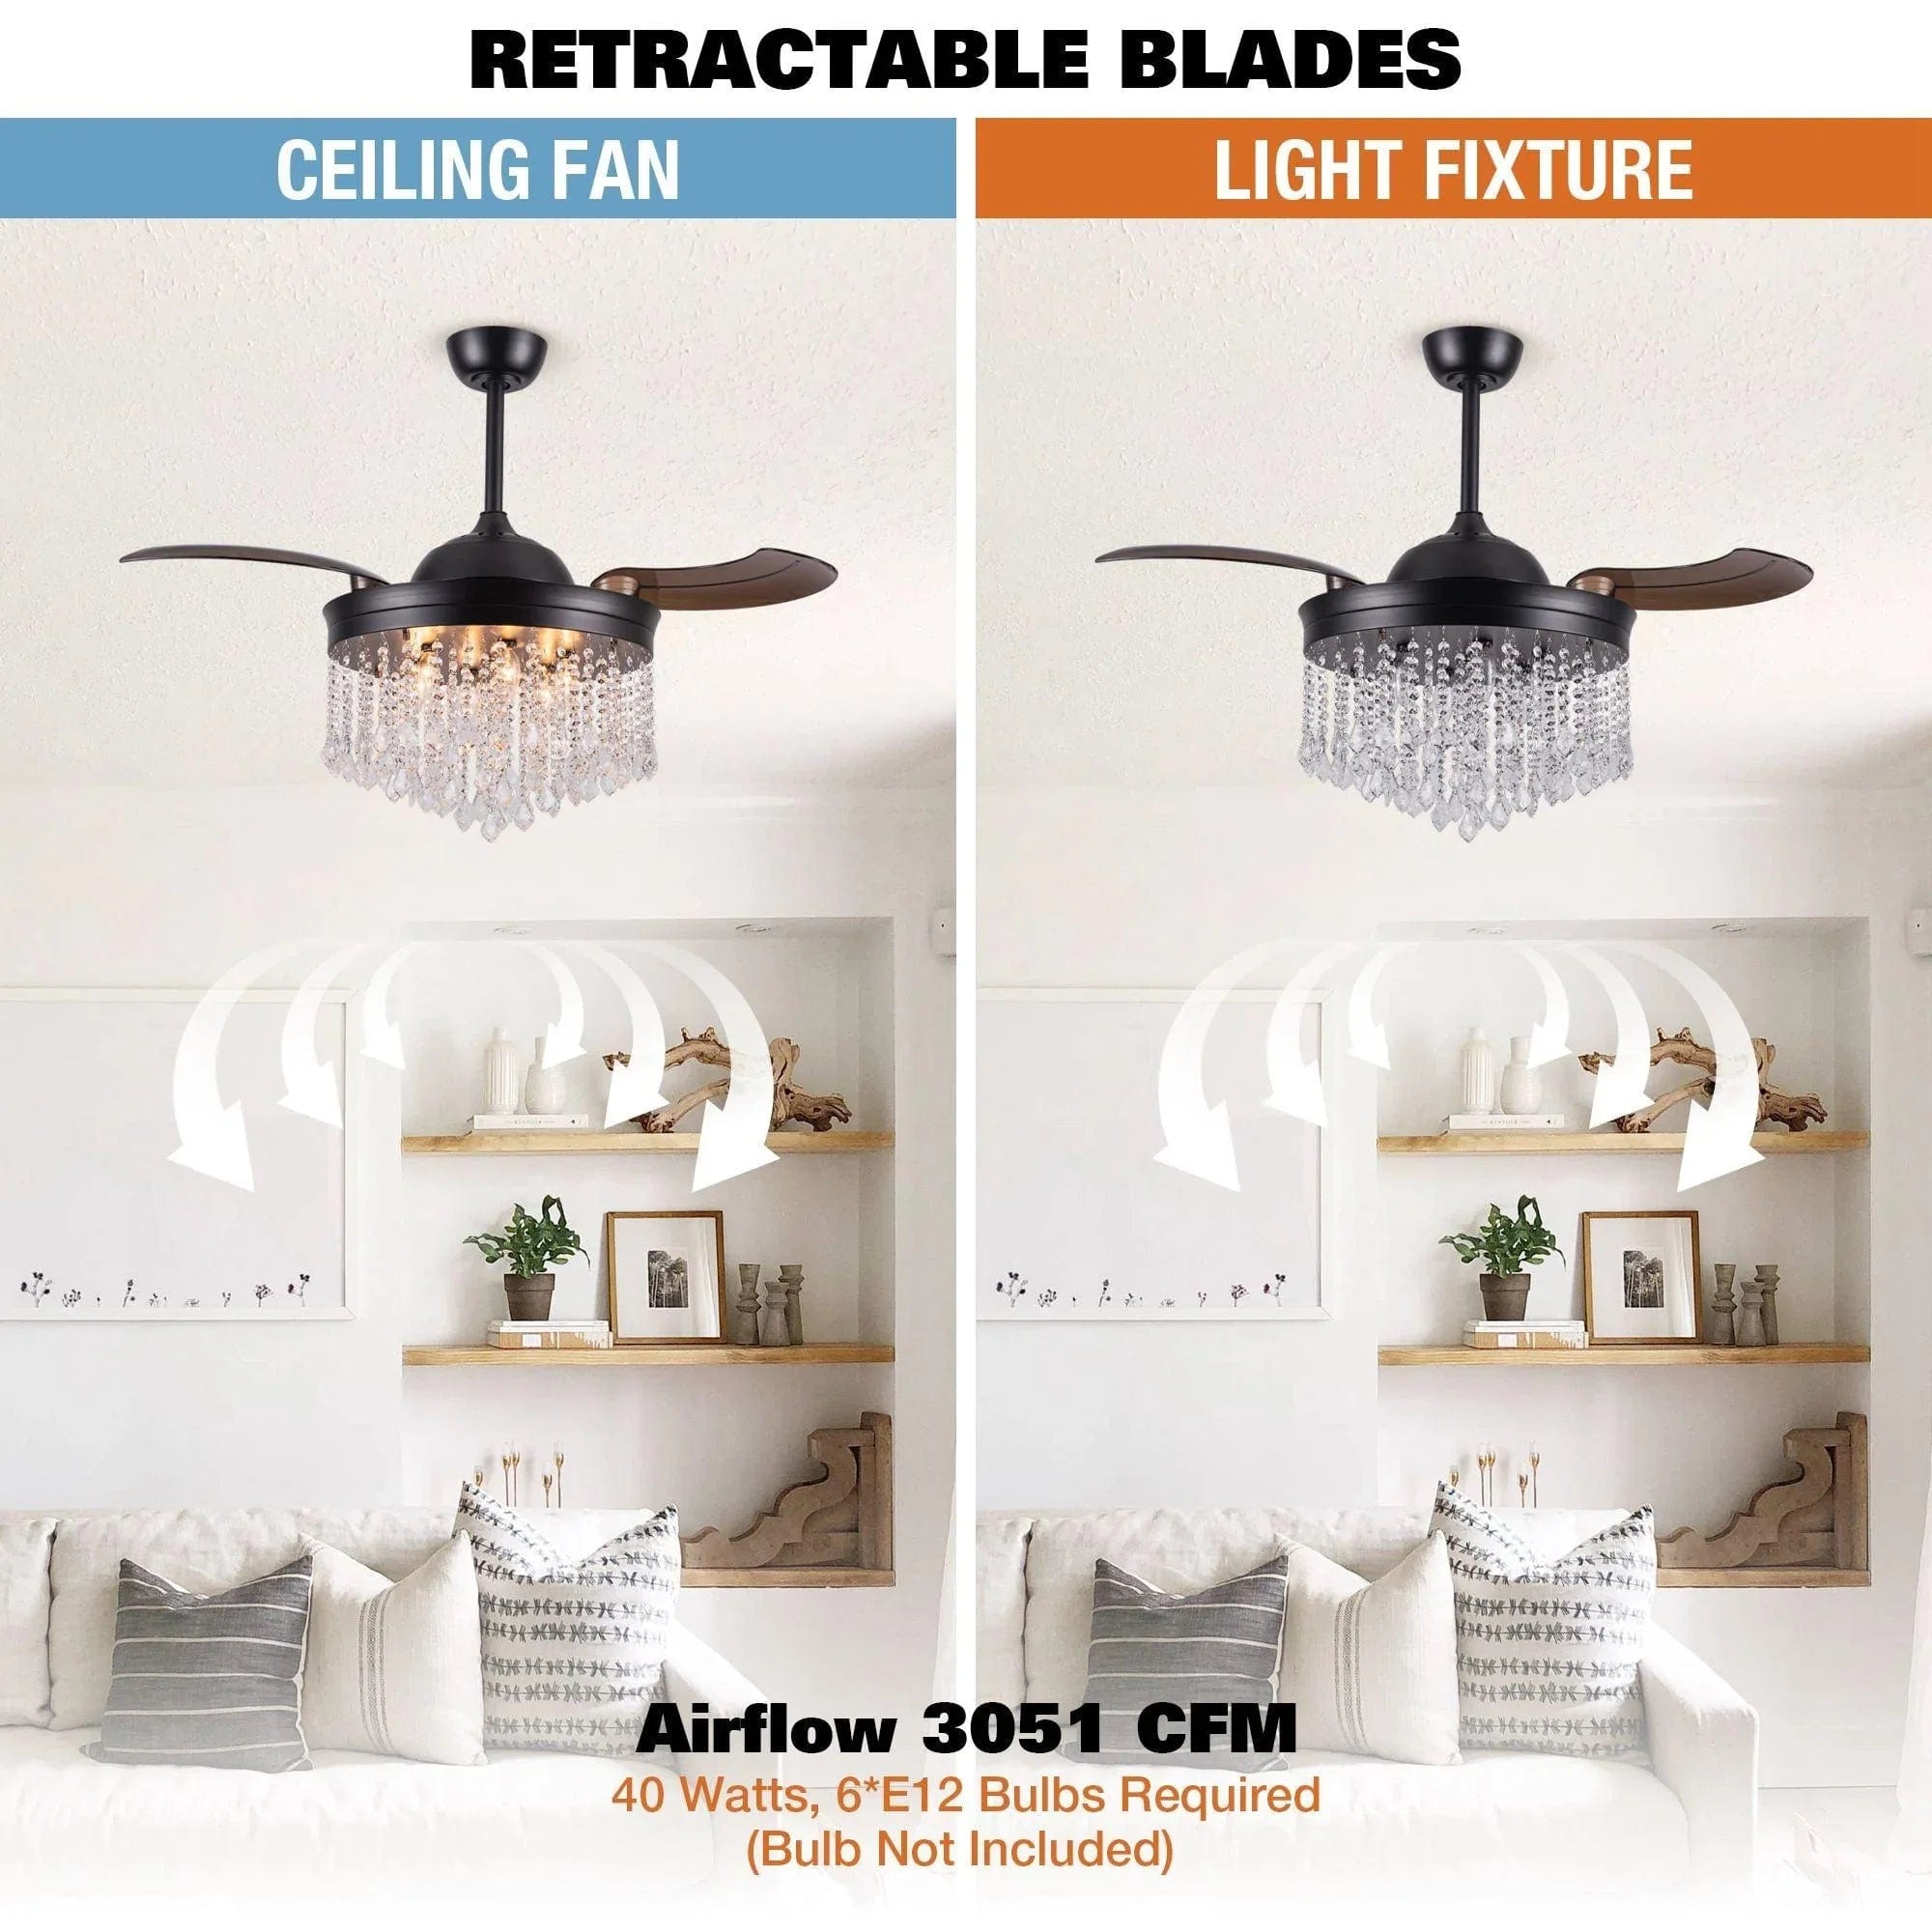 Parrot Uncle Parrot Uncle 42 In. Mateo Modern Ceiling Fan with Lighting and Remote Control Ceiling Fan F4706BK110V